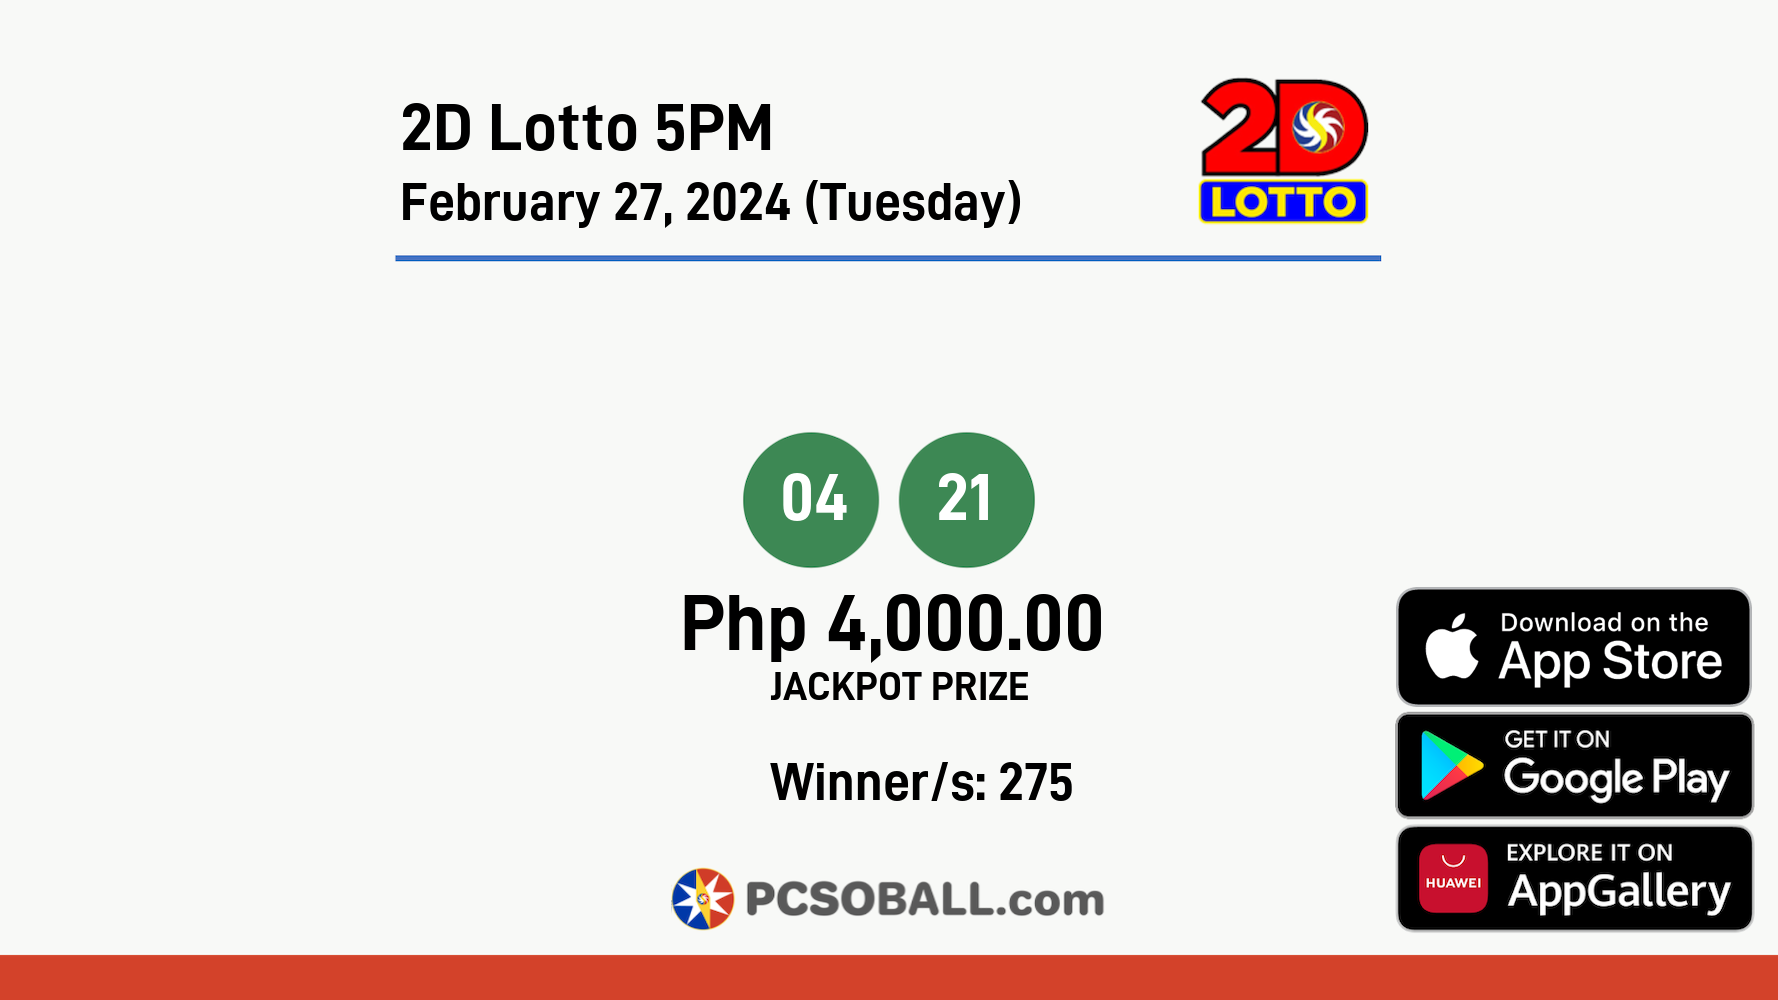 2D Lotto 5PM February 27, 2024 (Tuesday) Result